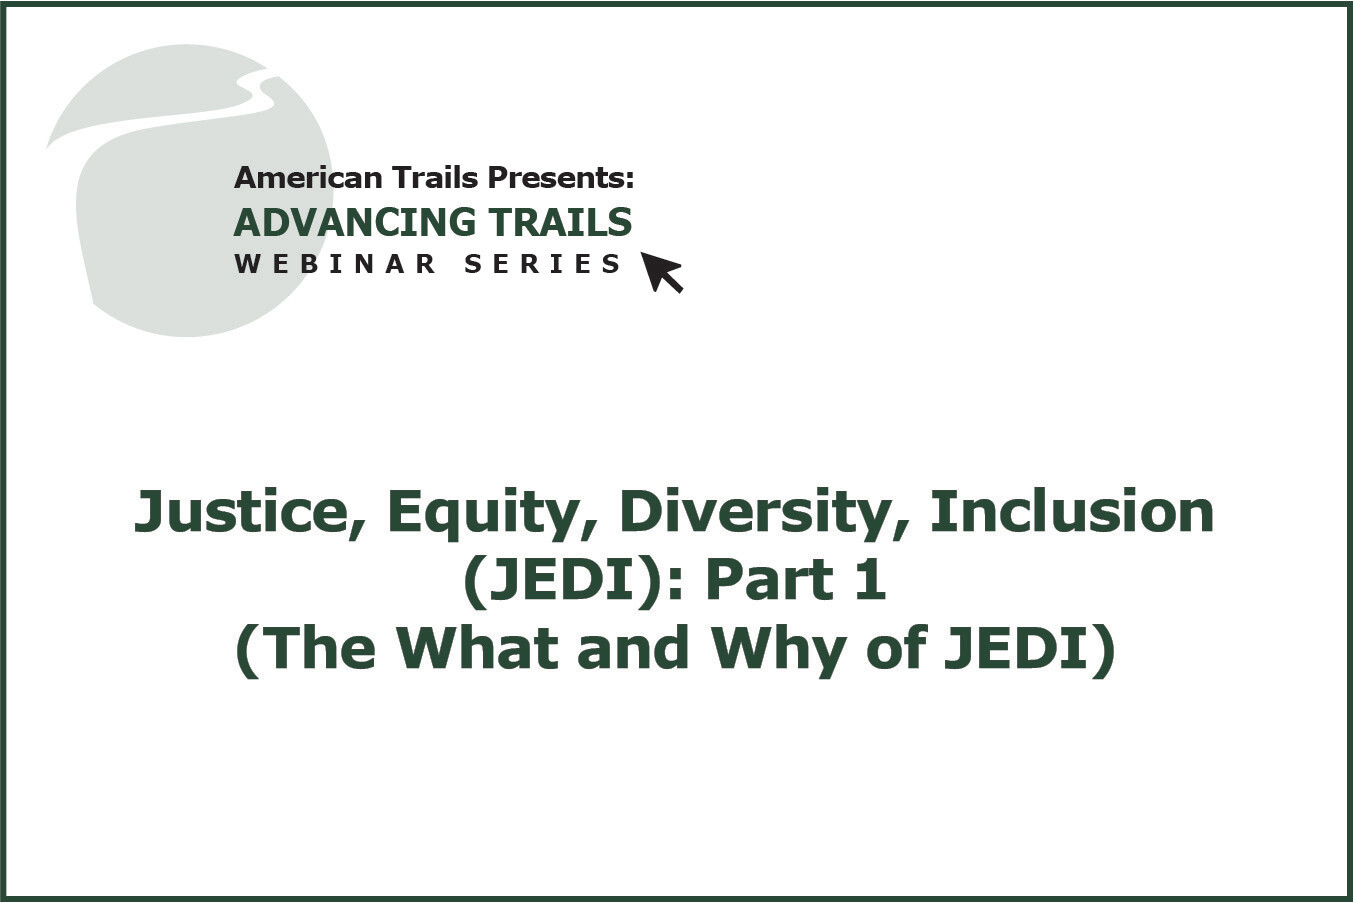 Justice, Equity, Diversity, and Inclusion (JEDI) (Part 1 of 2) (RECORDING)